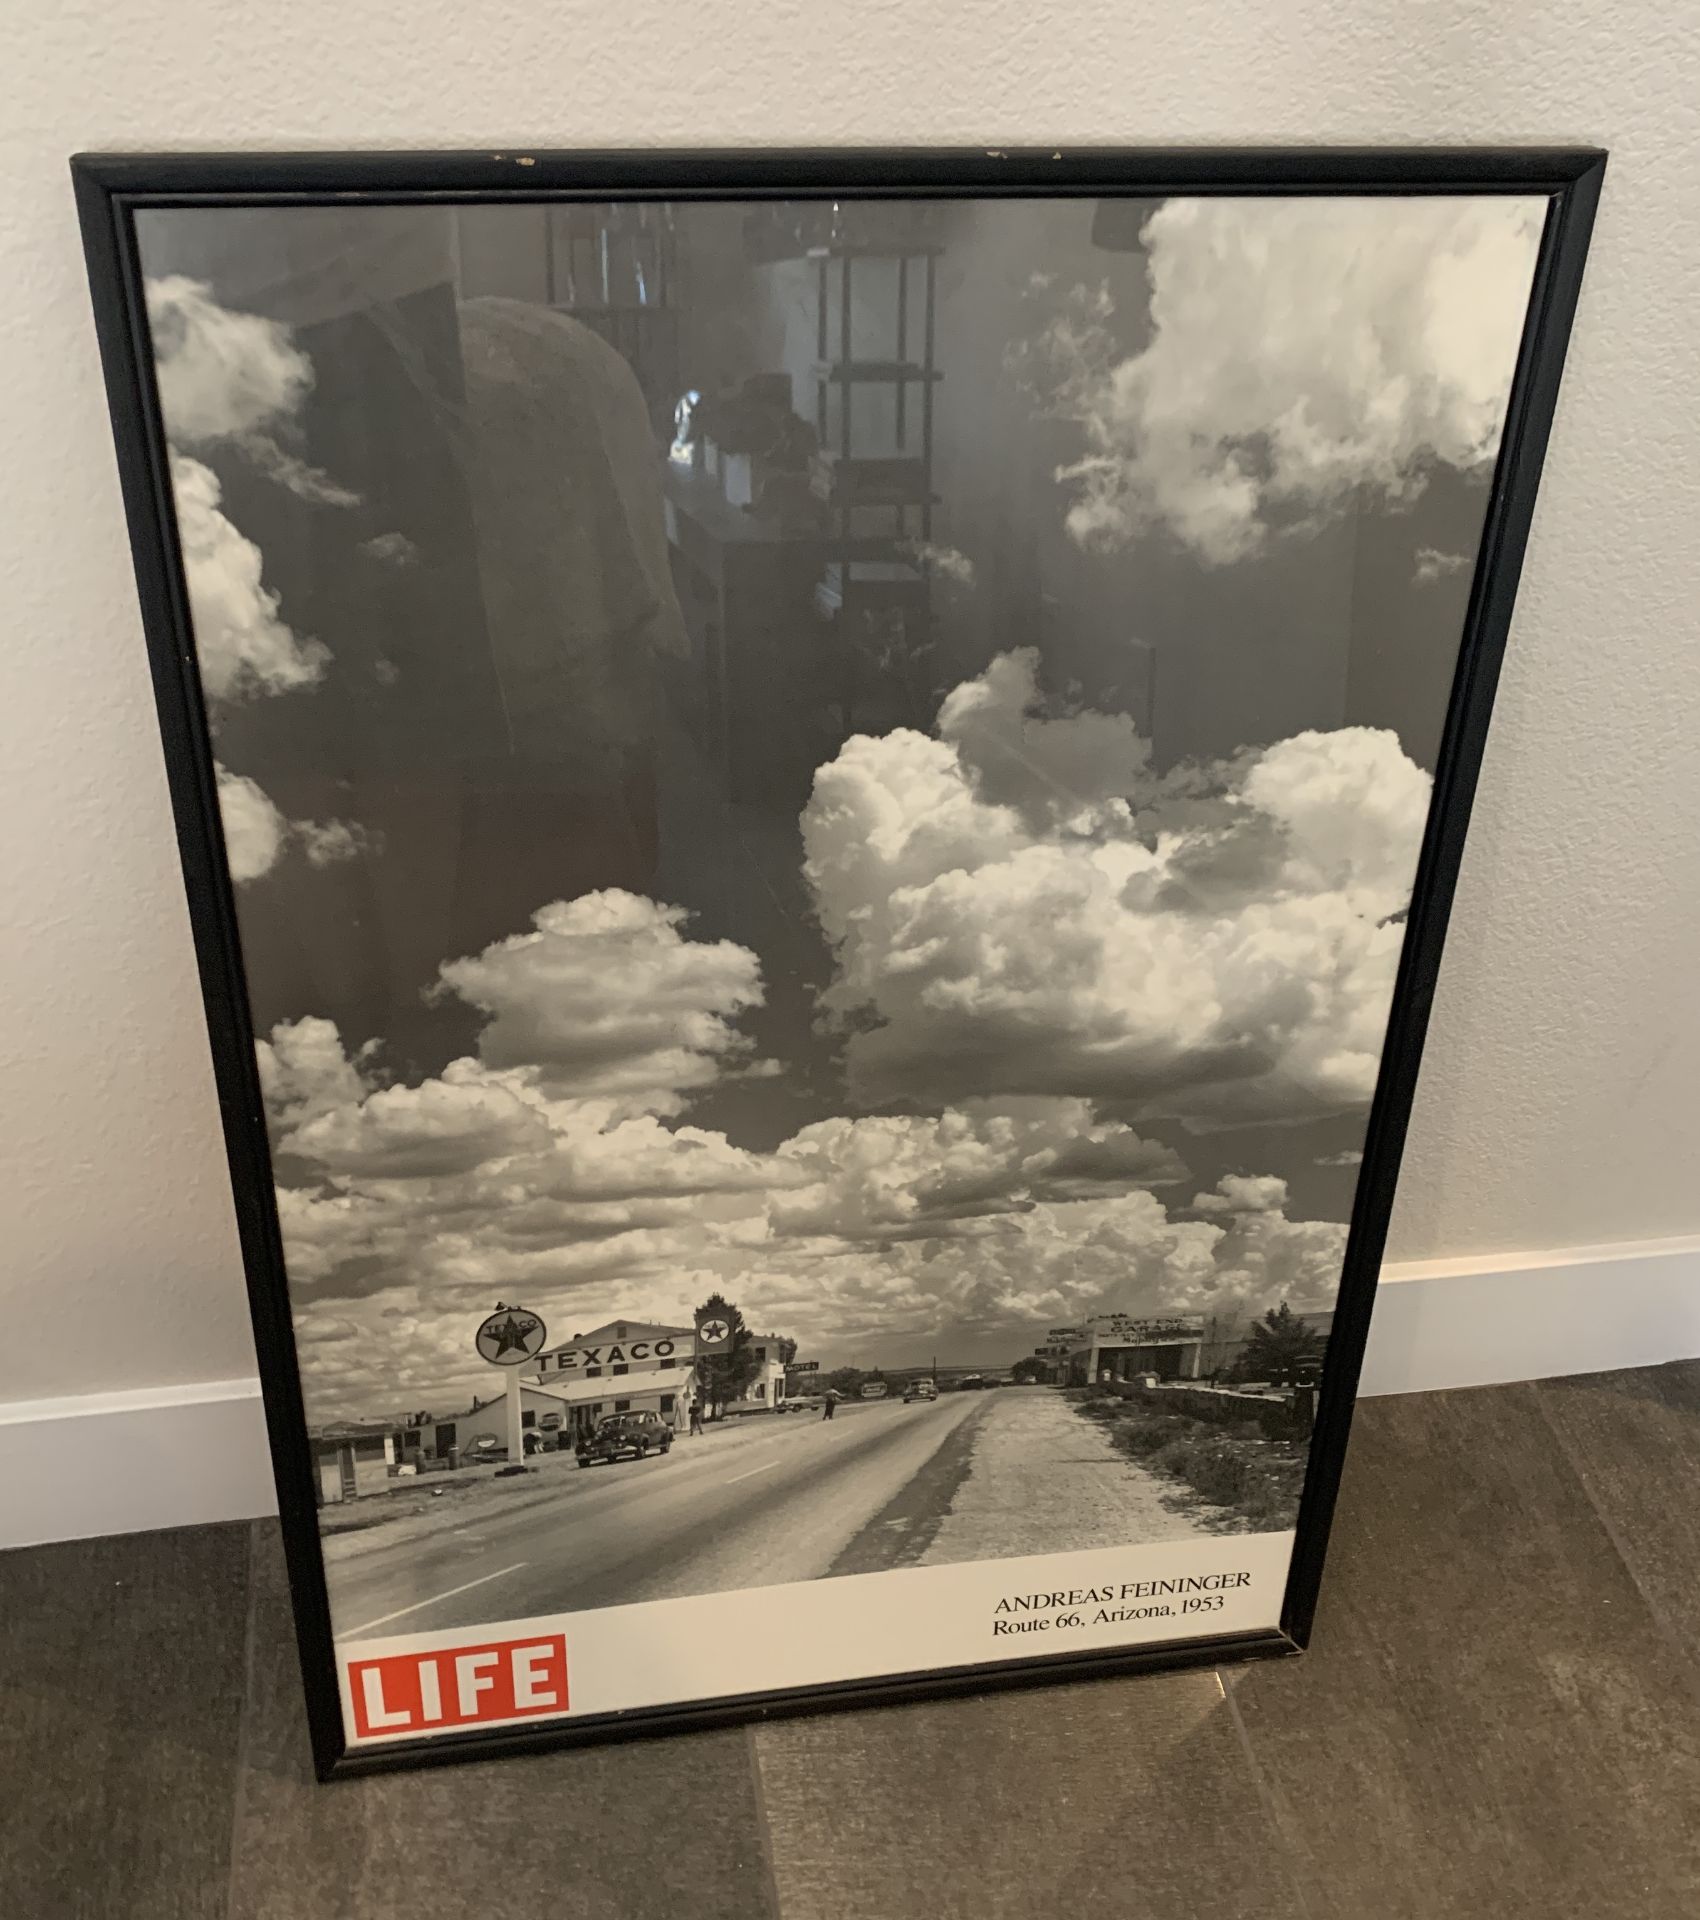 ANDREAS FEININGER ROUTE 66, ARIZONA 1953 TIME LIFE HIGHLY COLLECTIBLE RARE FRAMED COVER ART 24.5X35"